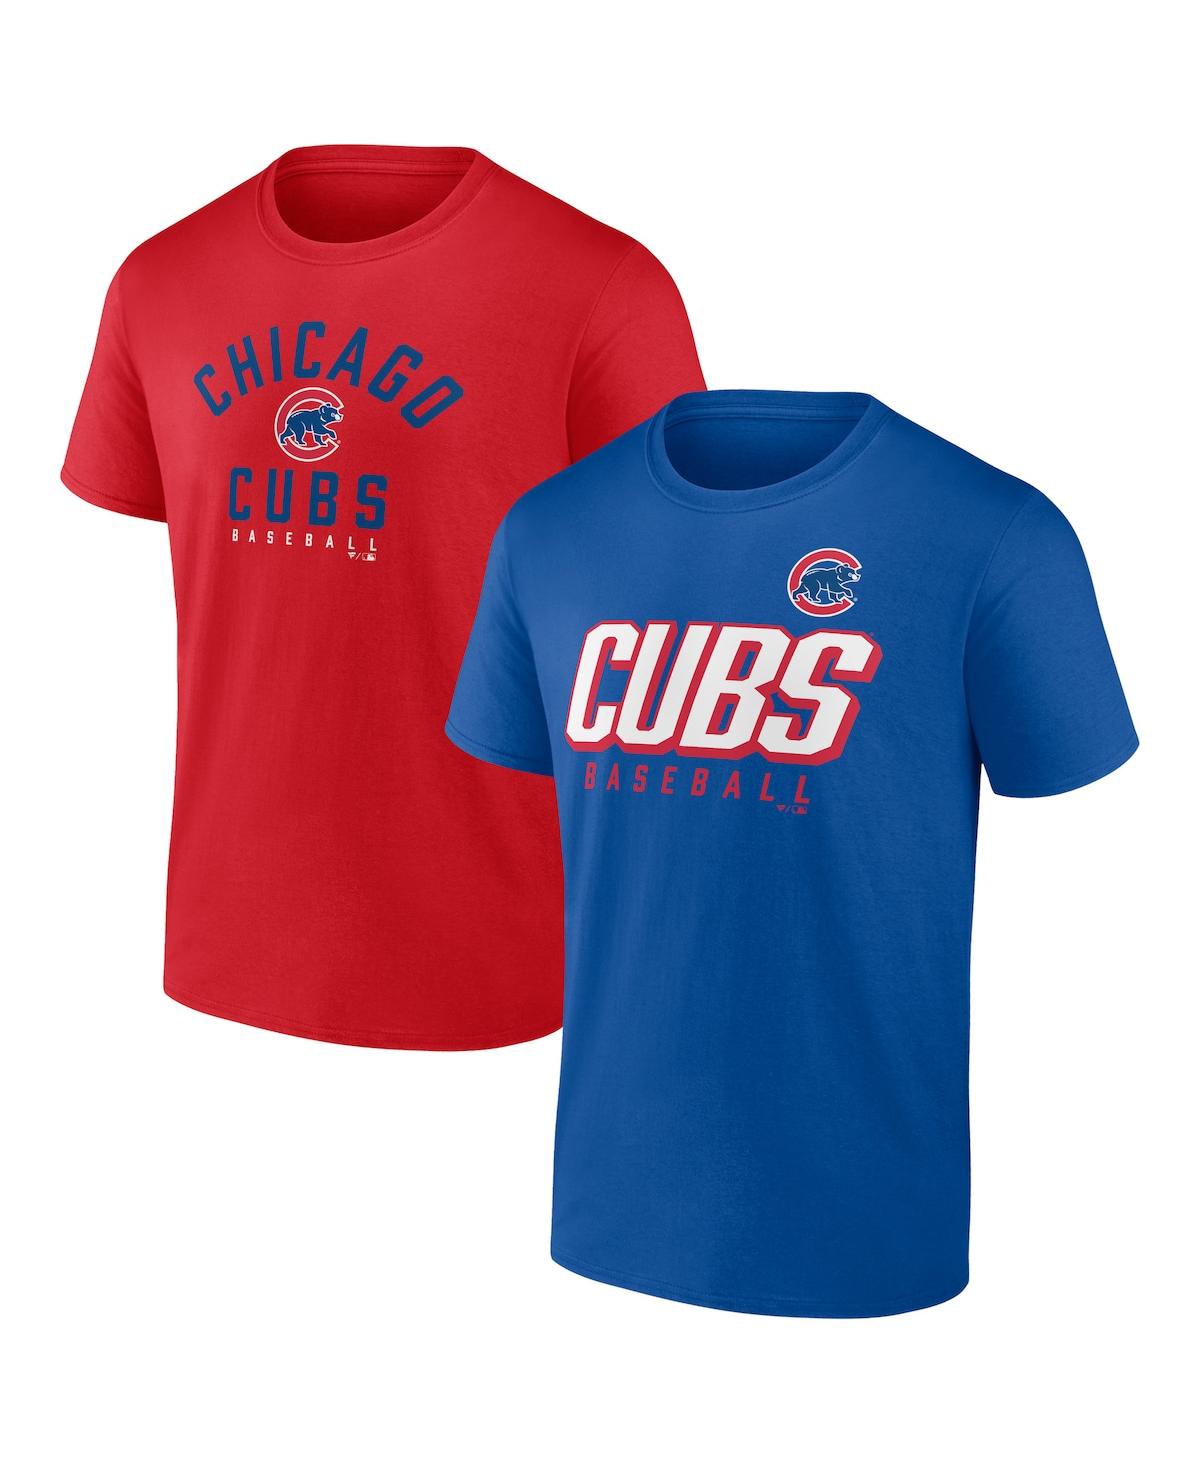 Men's Fanatics Branded Royal/Red Chicago Cubs Player Pack T-Shirt Combo Set